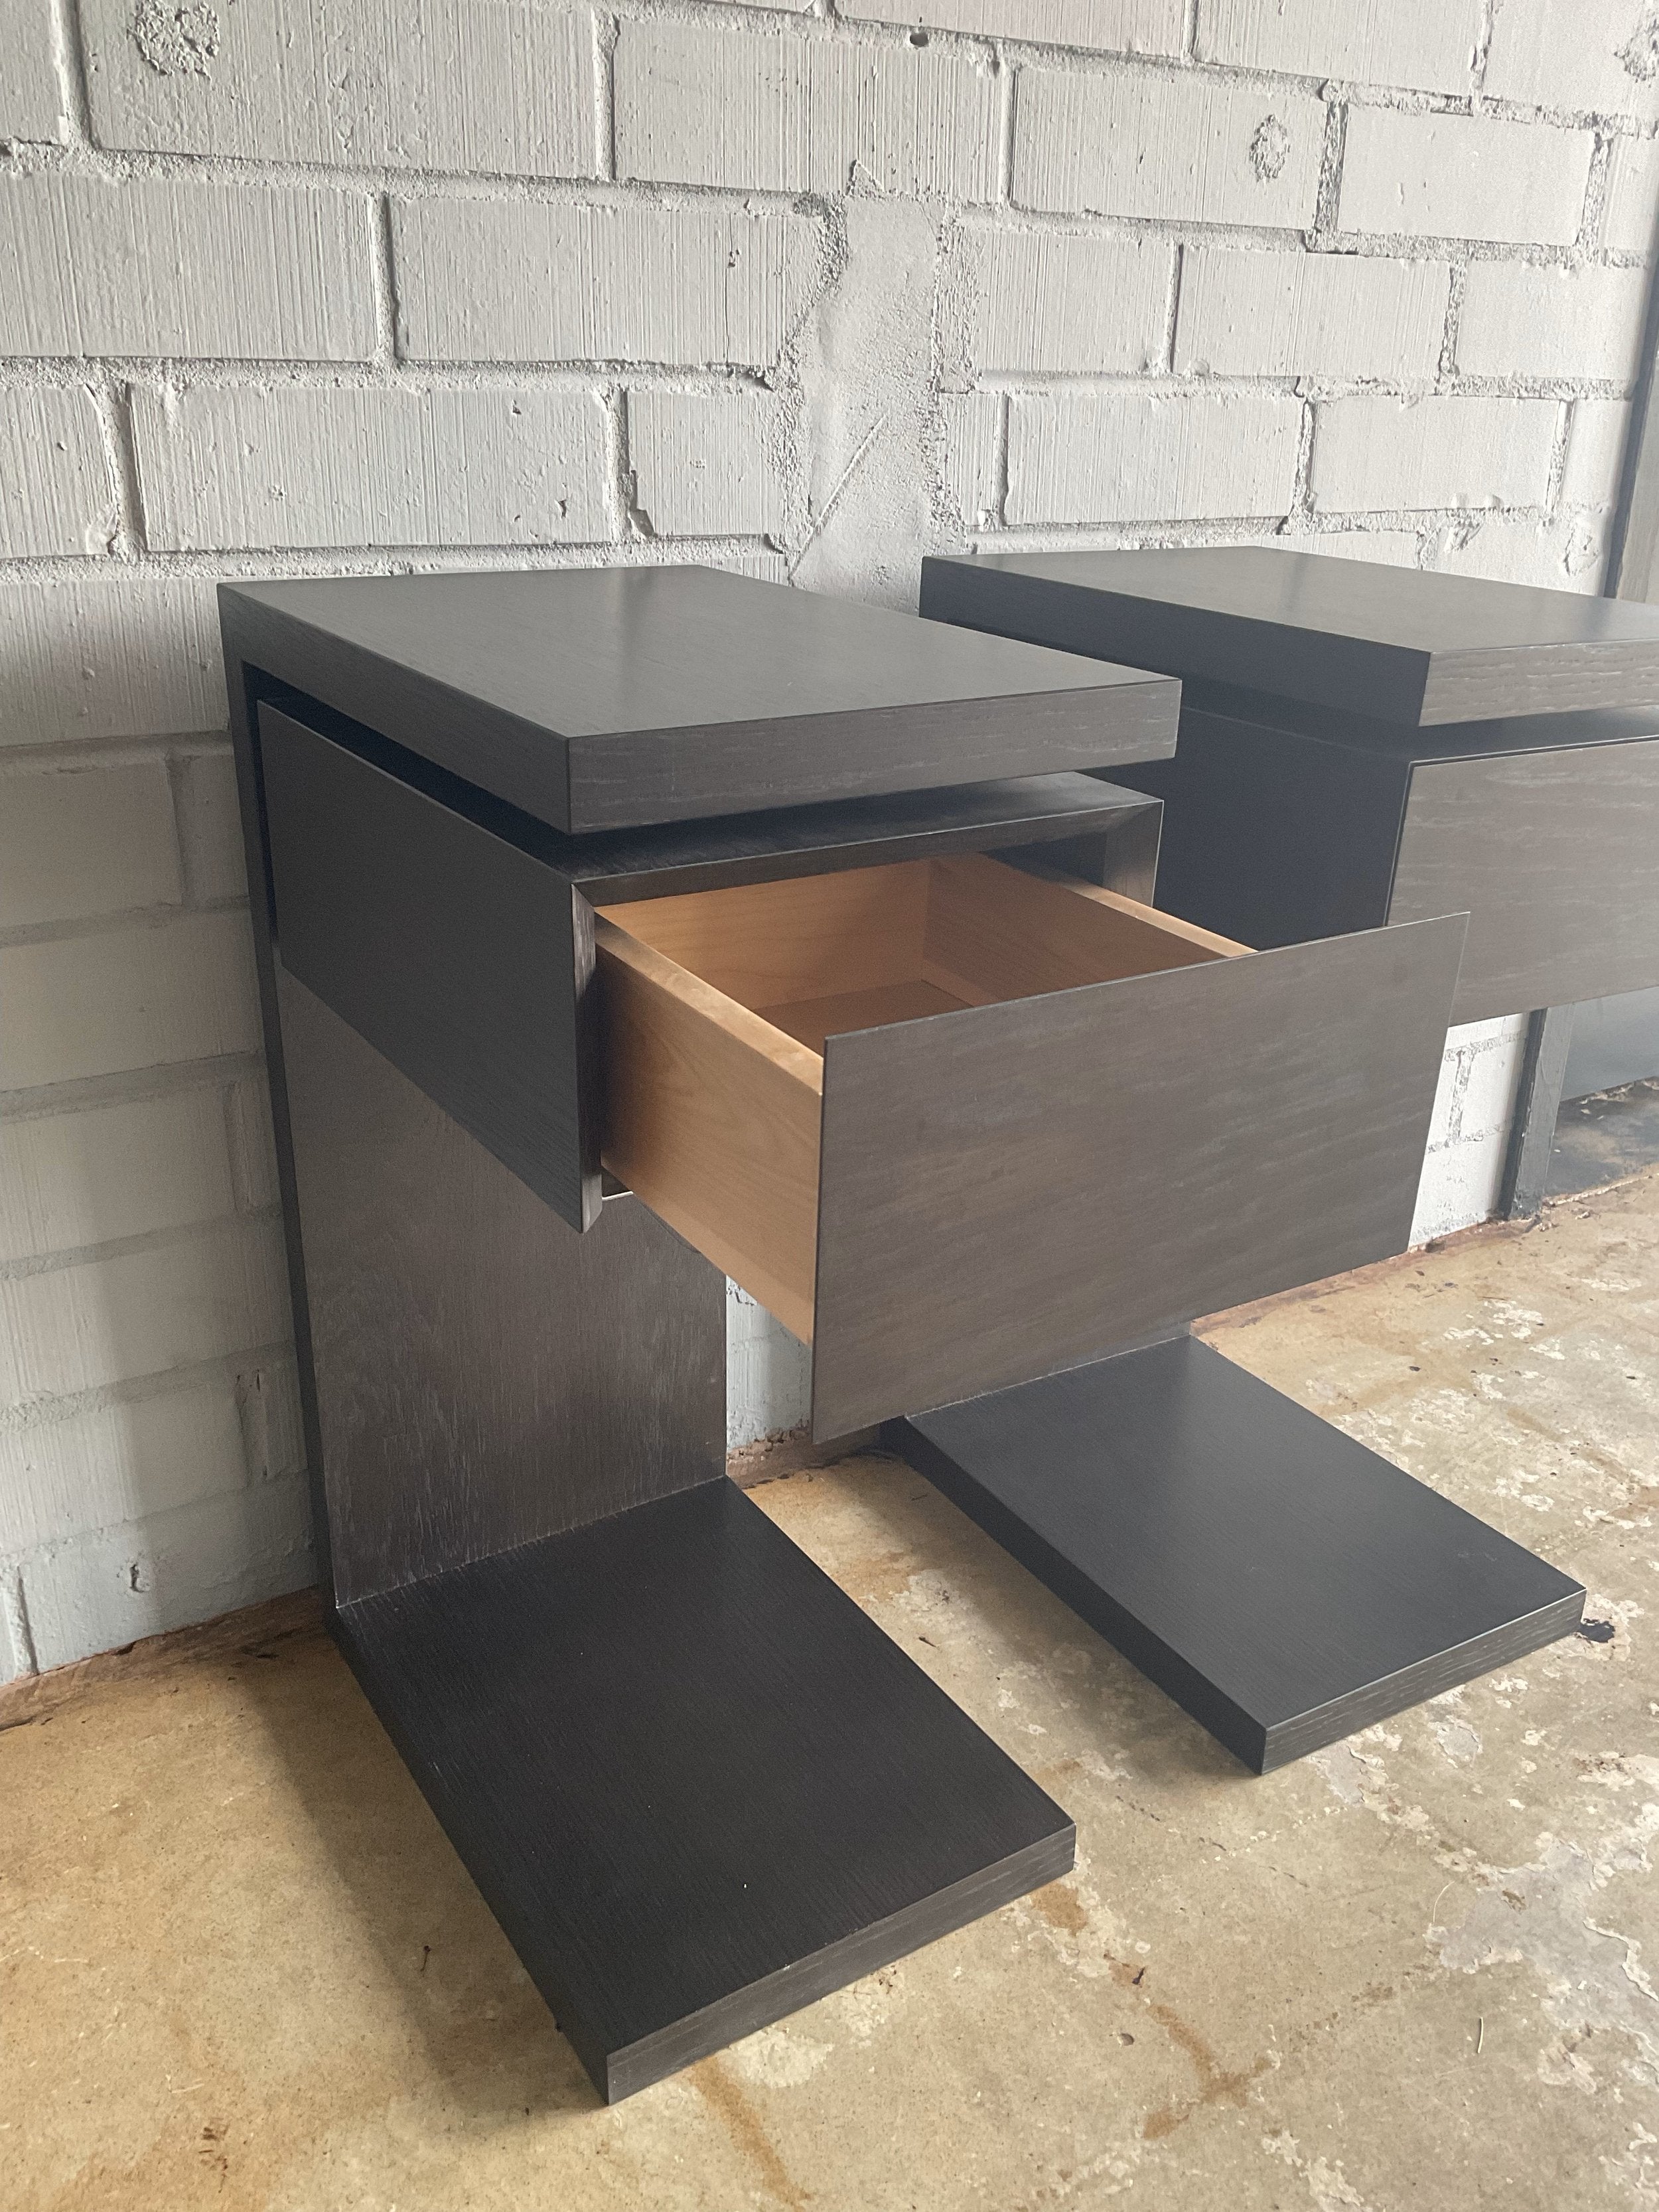 PAIR OF NIGHTSTANDS WITH DRAWERS